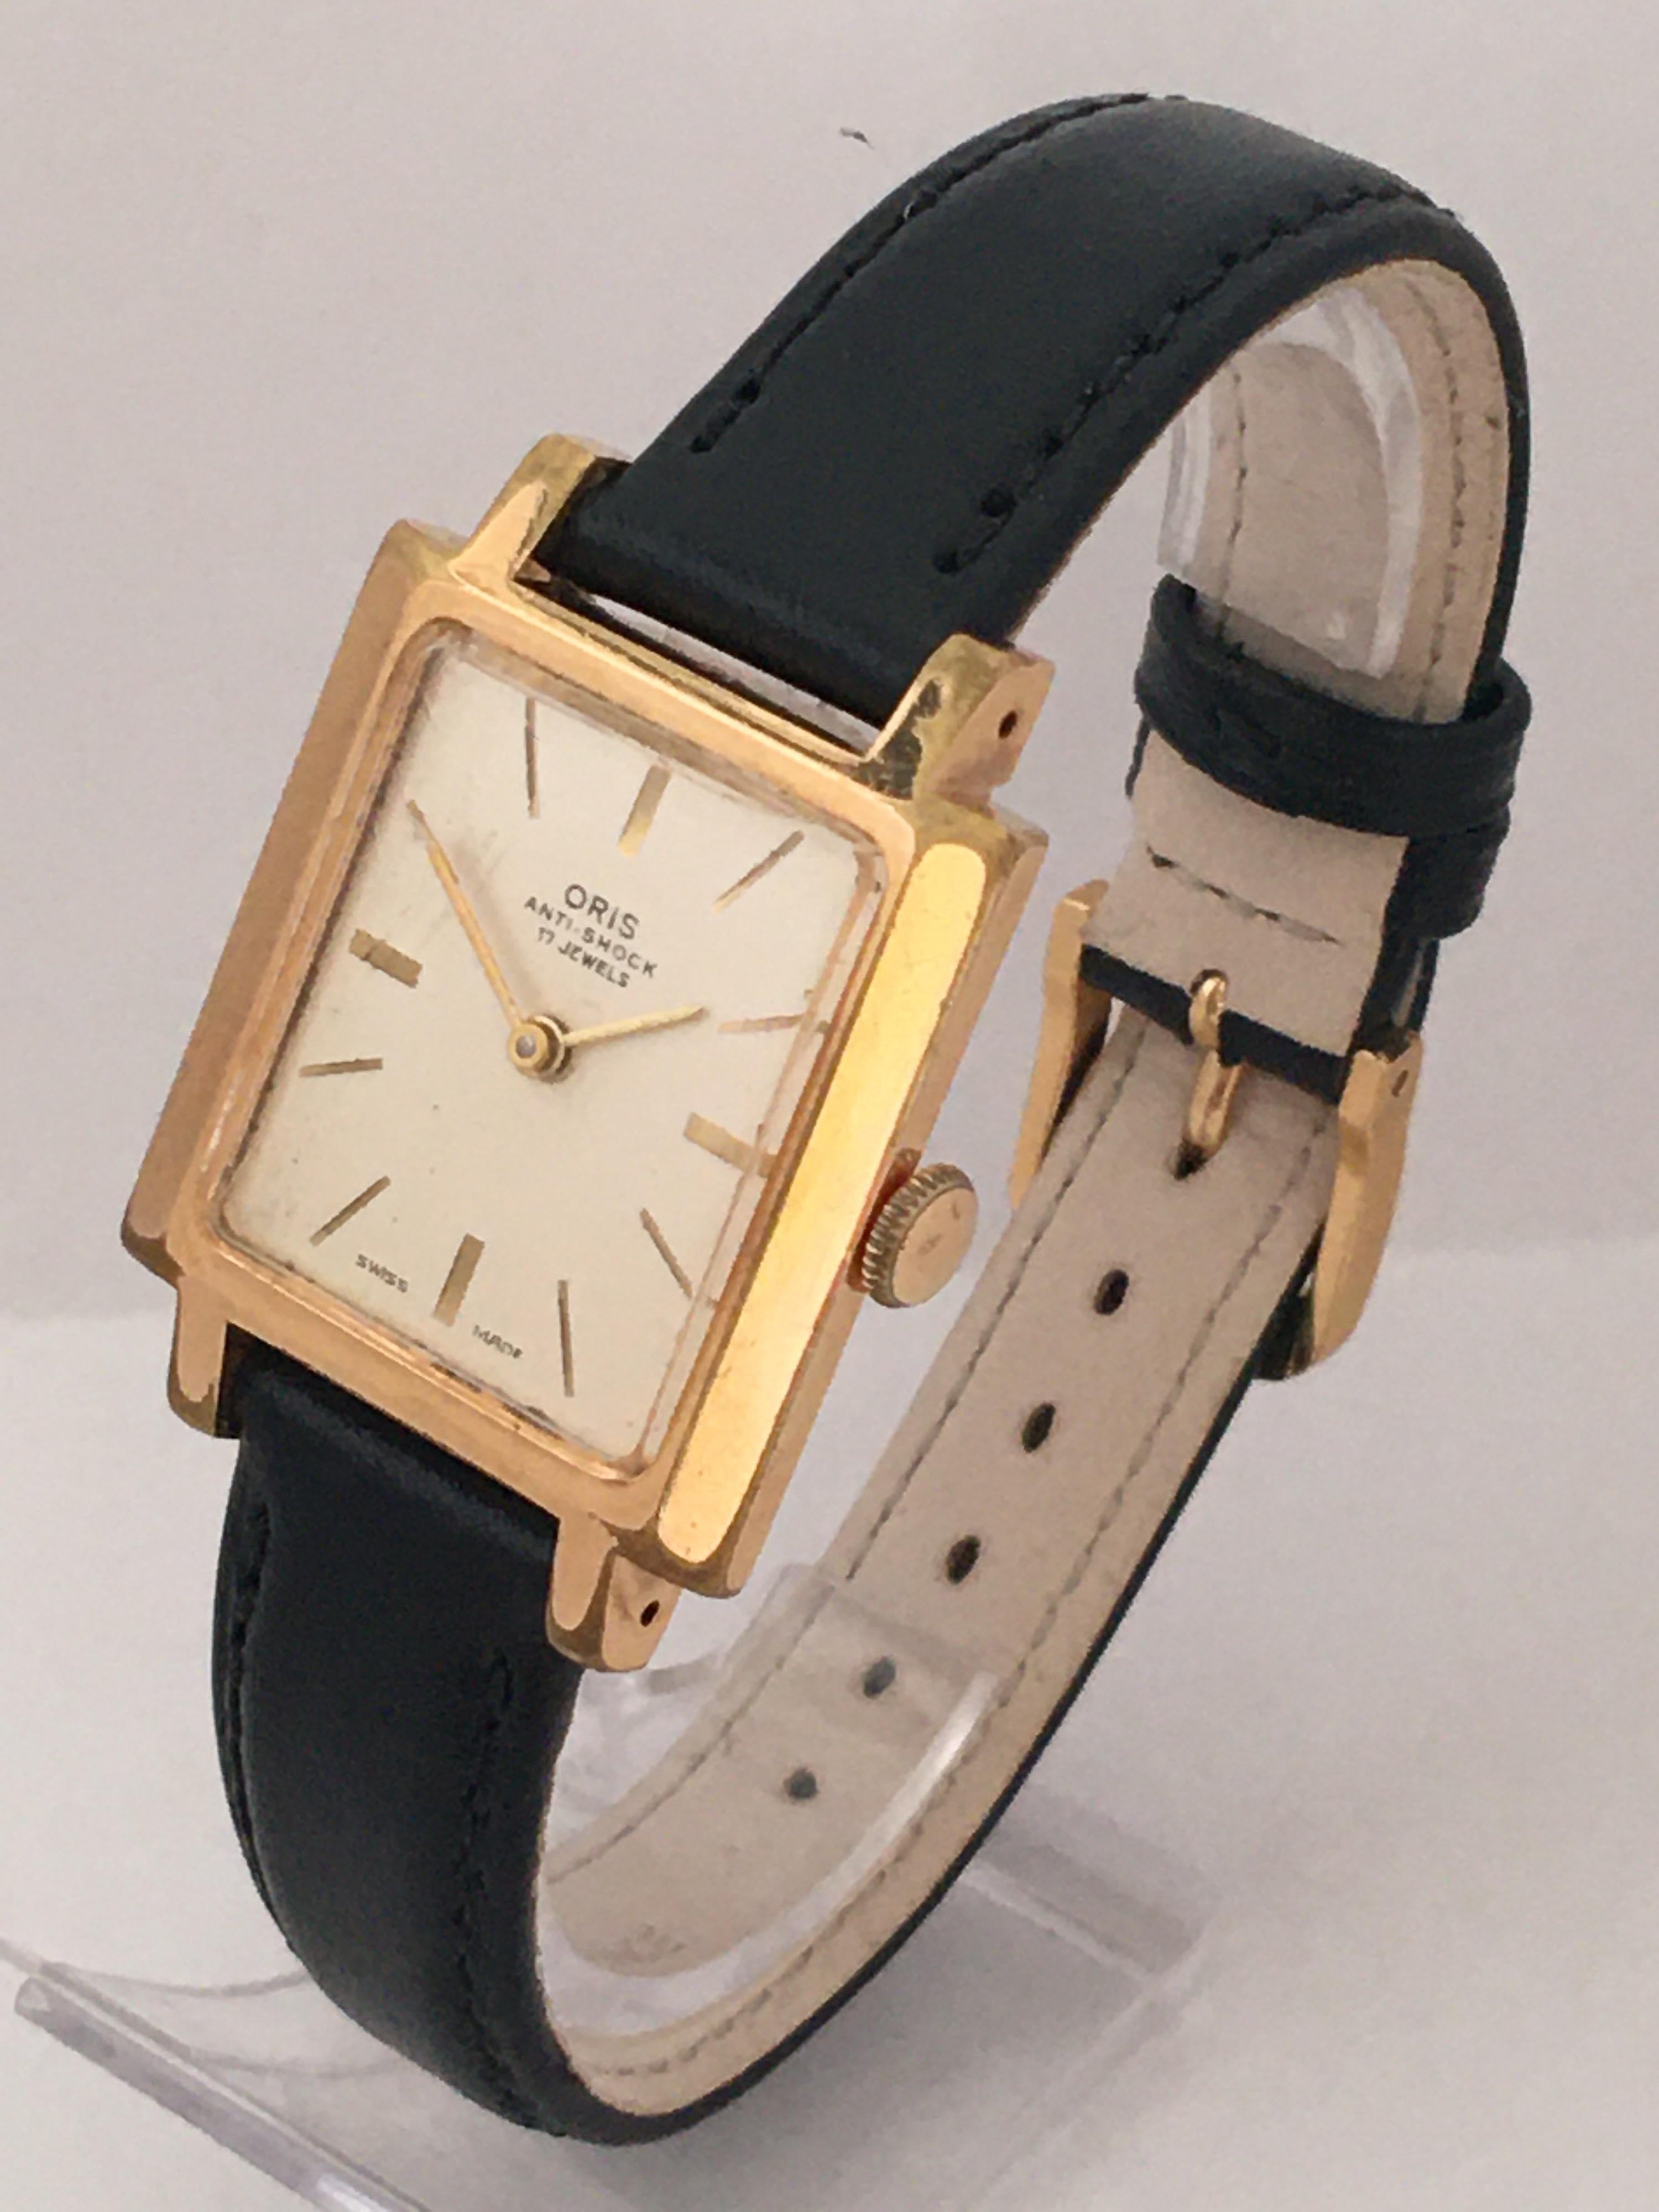 This beautiful Pre-owned vintage Swiss Mechanical Watch is in good Working condition and it is ticking well. Visible signs of wearing with slight scratches on the glass as shown. Fitted with new black leather strap.

Please study the images